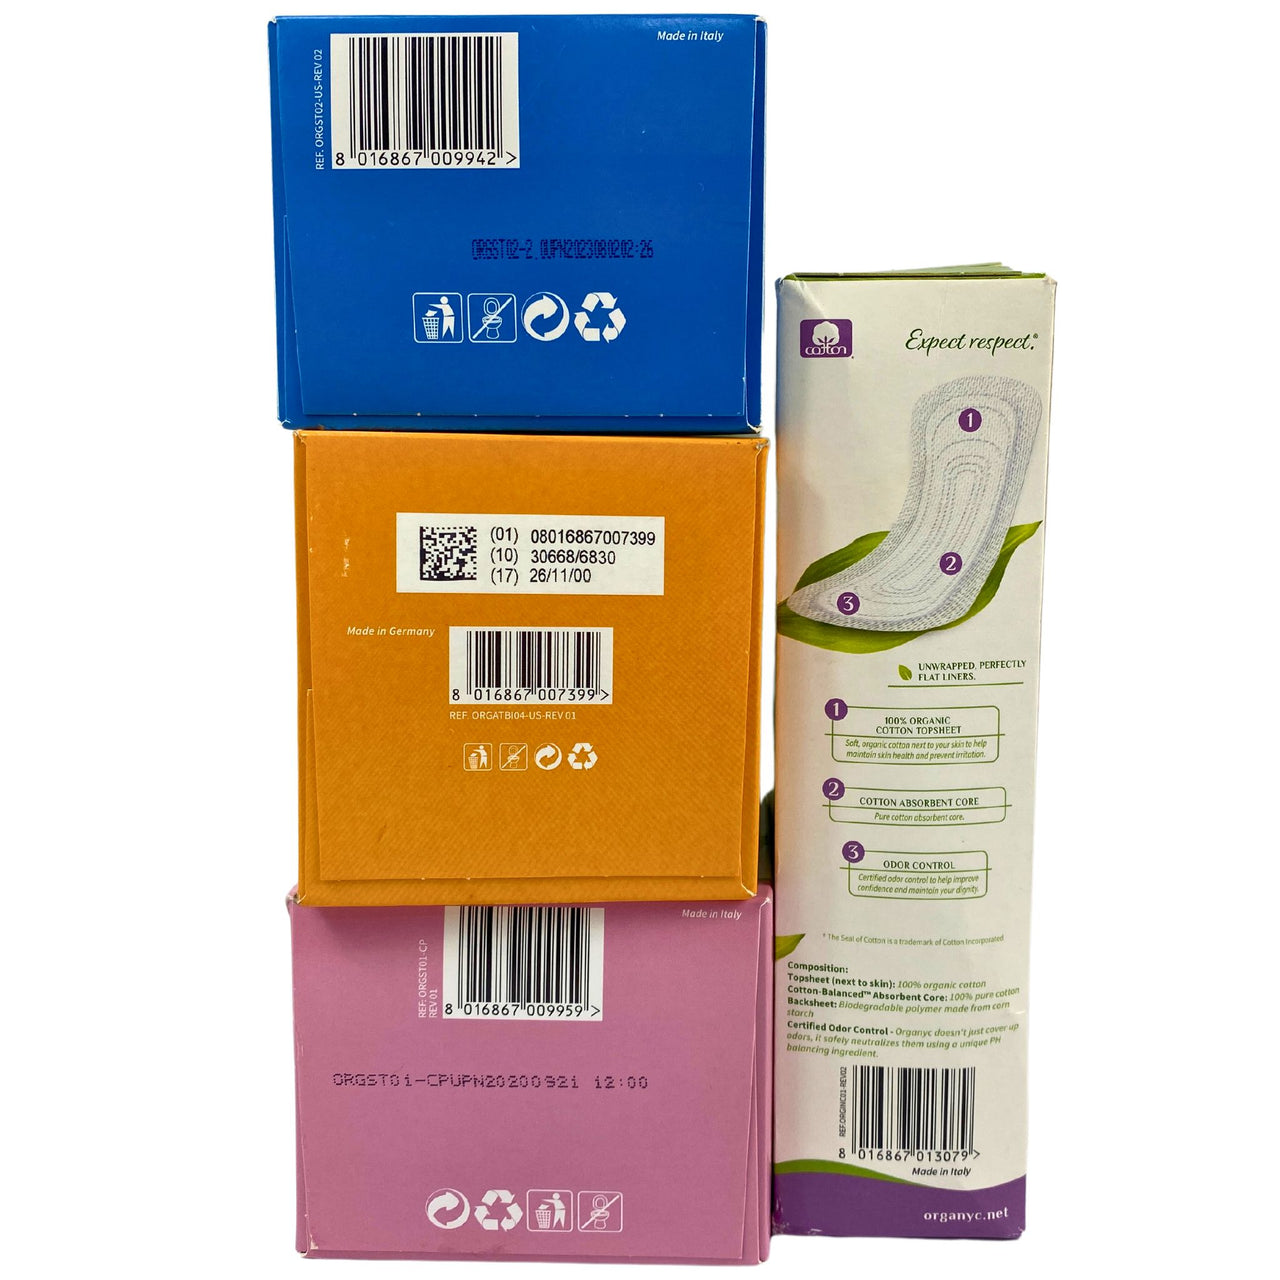 Organyc Mix Includes Assorted Feminine Care Tampons & Pads